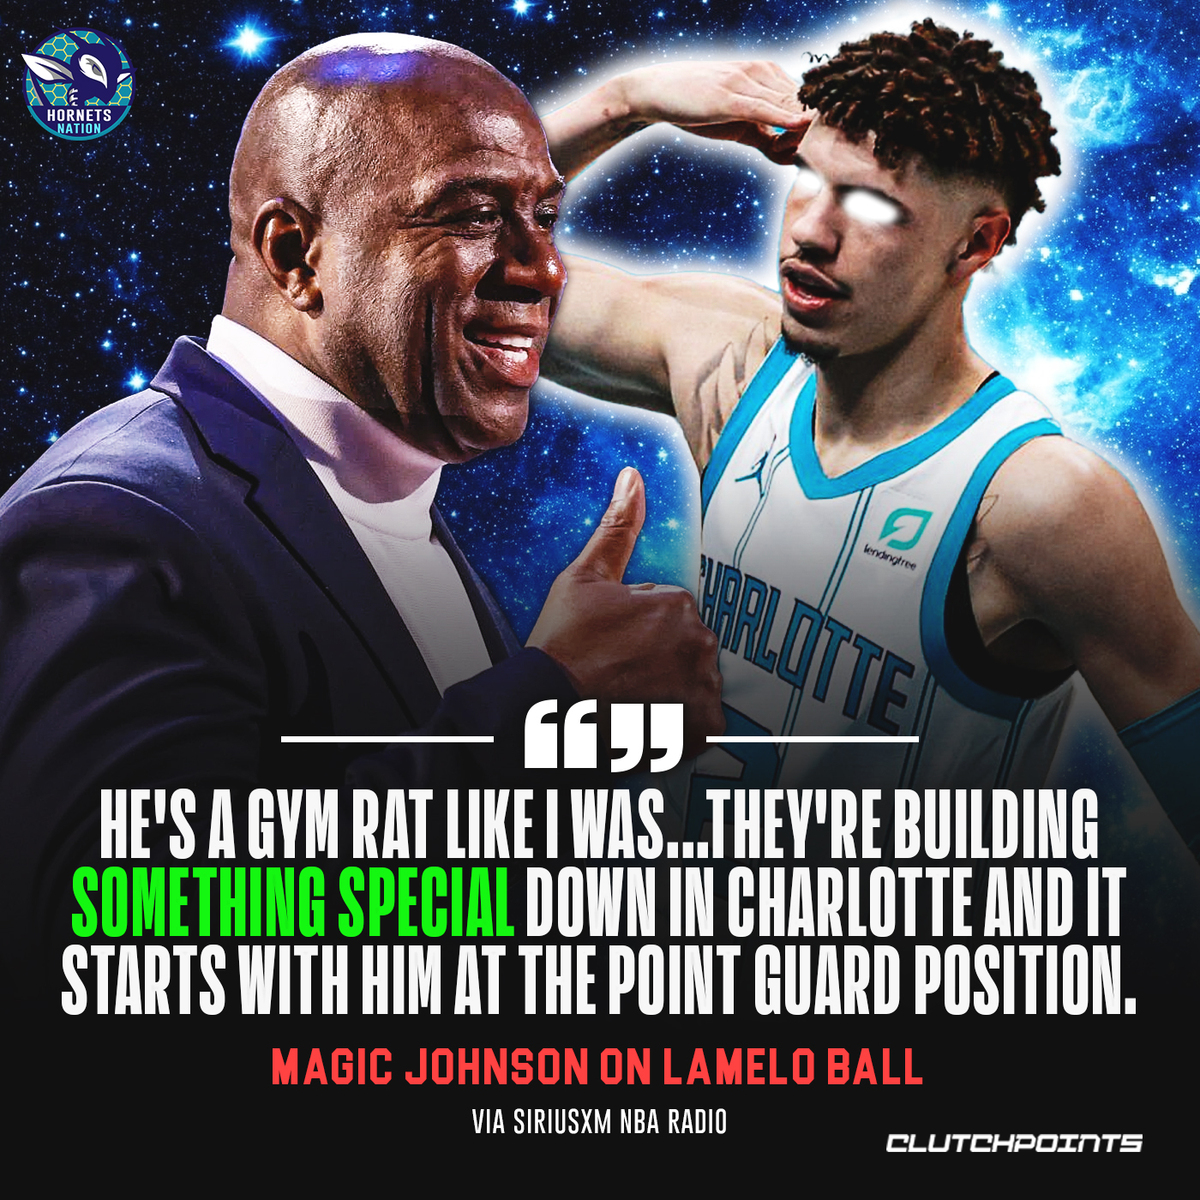 Twitter User Compared LaMelo Ball To Magic Johnson